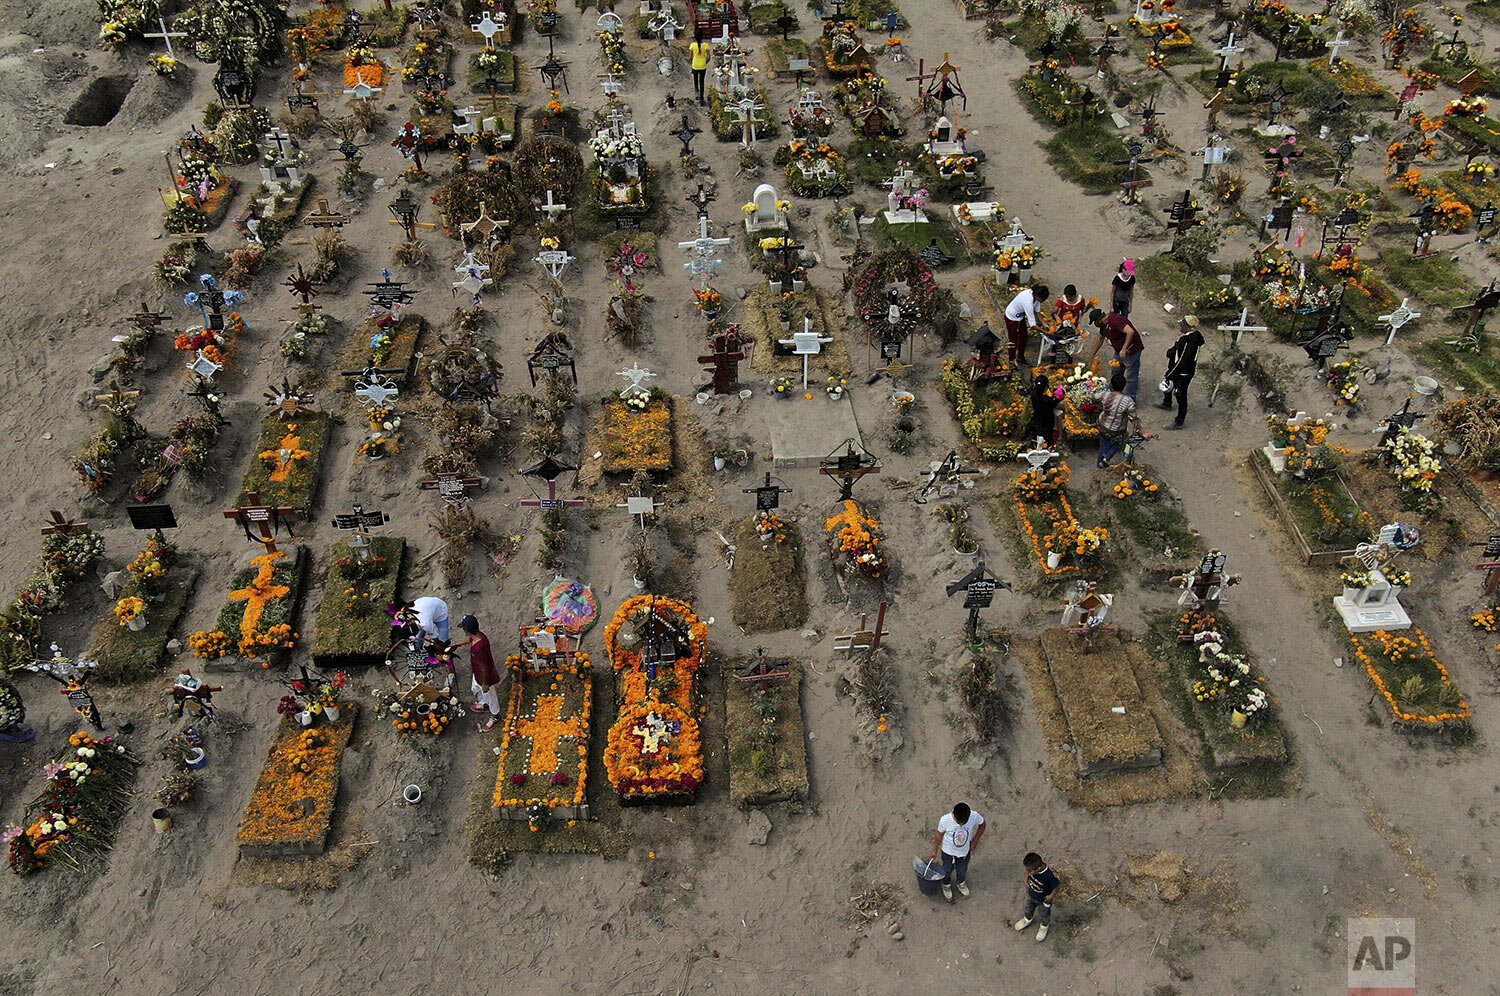  People visit the graves of their relatives buried at the Valle de Chalco municipal cemetery, some decorated ahead of the Day of the Dead holiday, on the outskirts of Mexico City, Oct. 29, 2020. (AP Photo/Fernando Llano) 